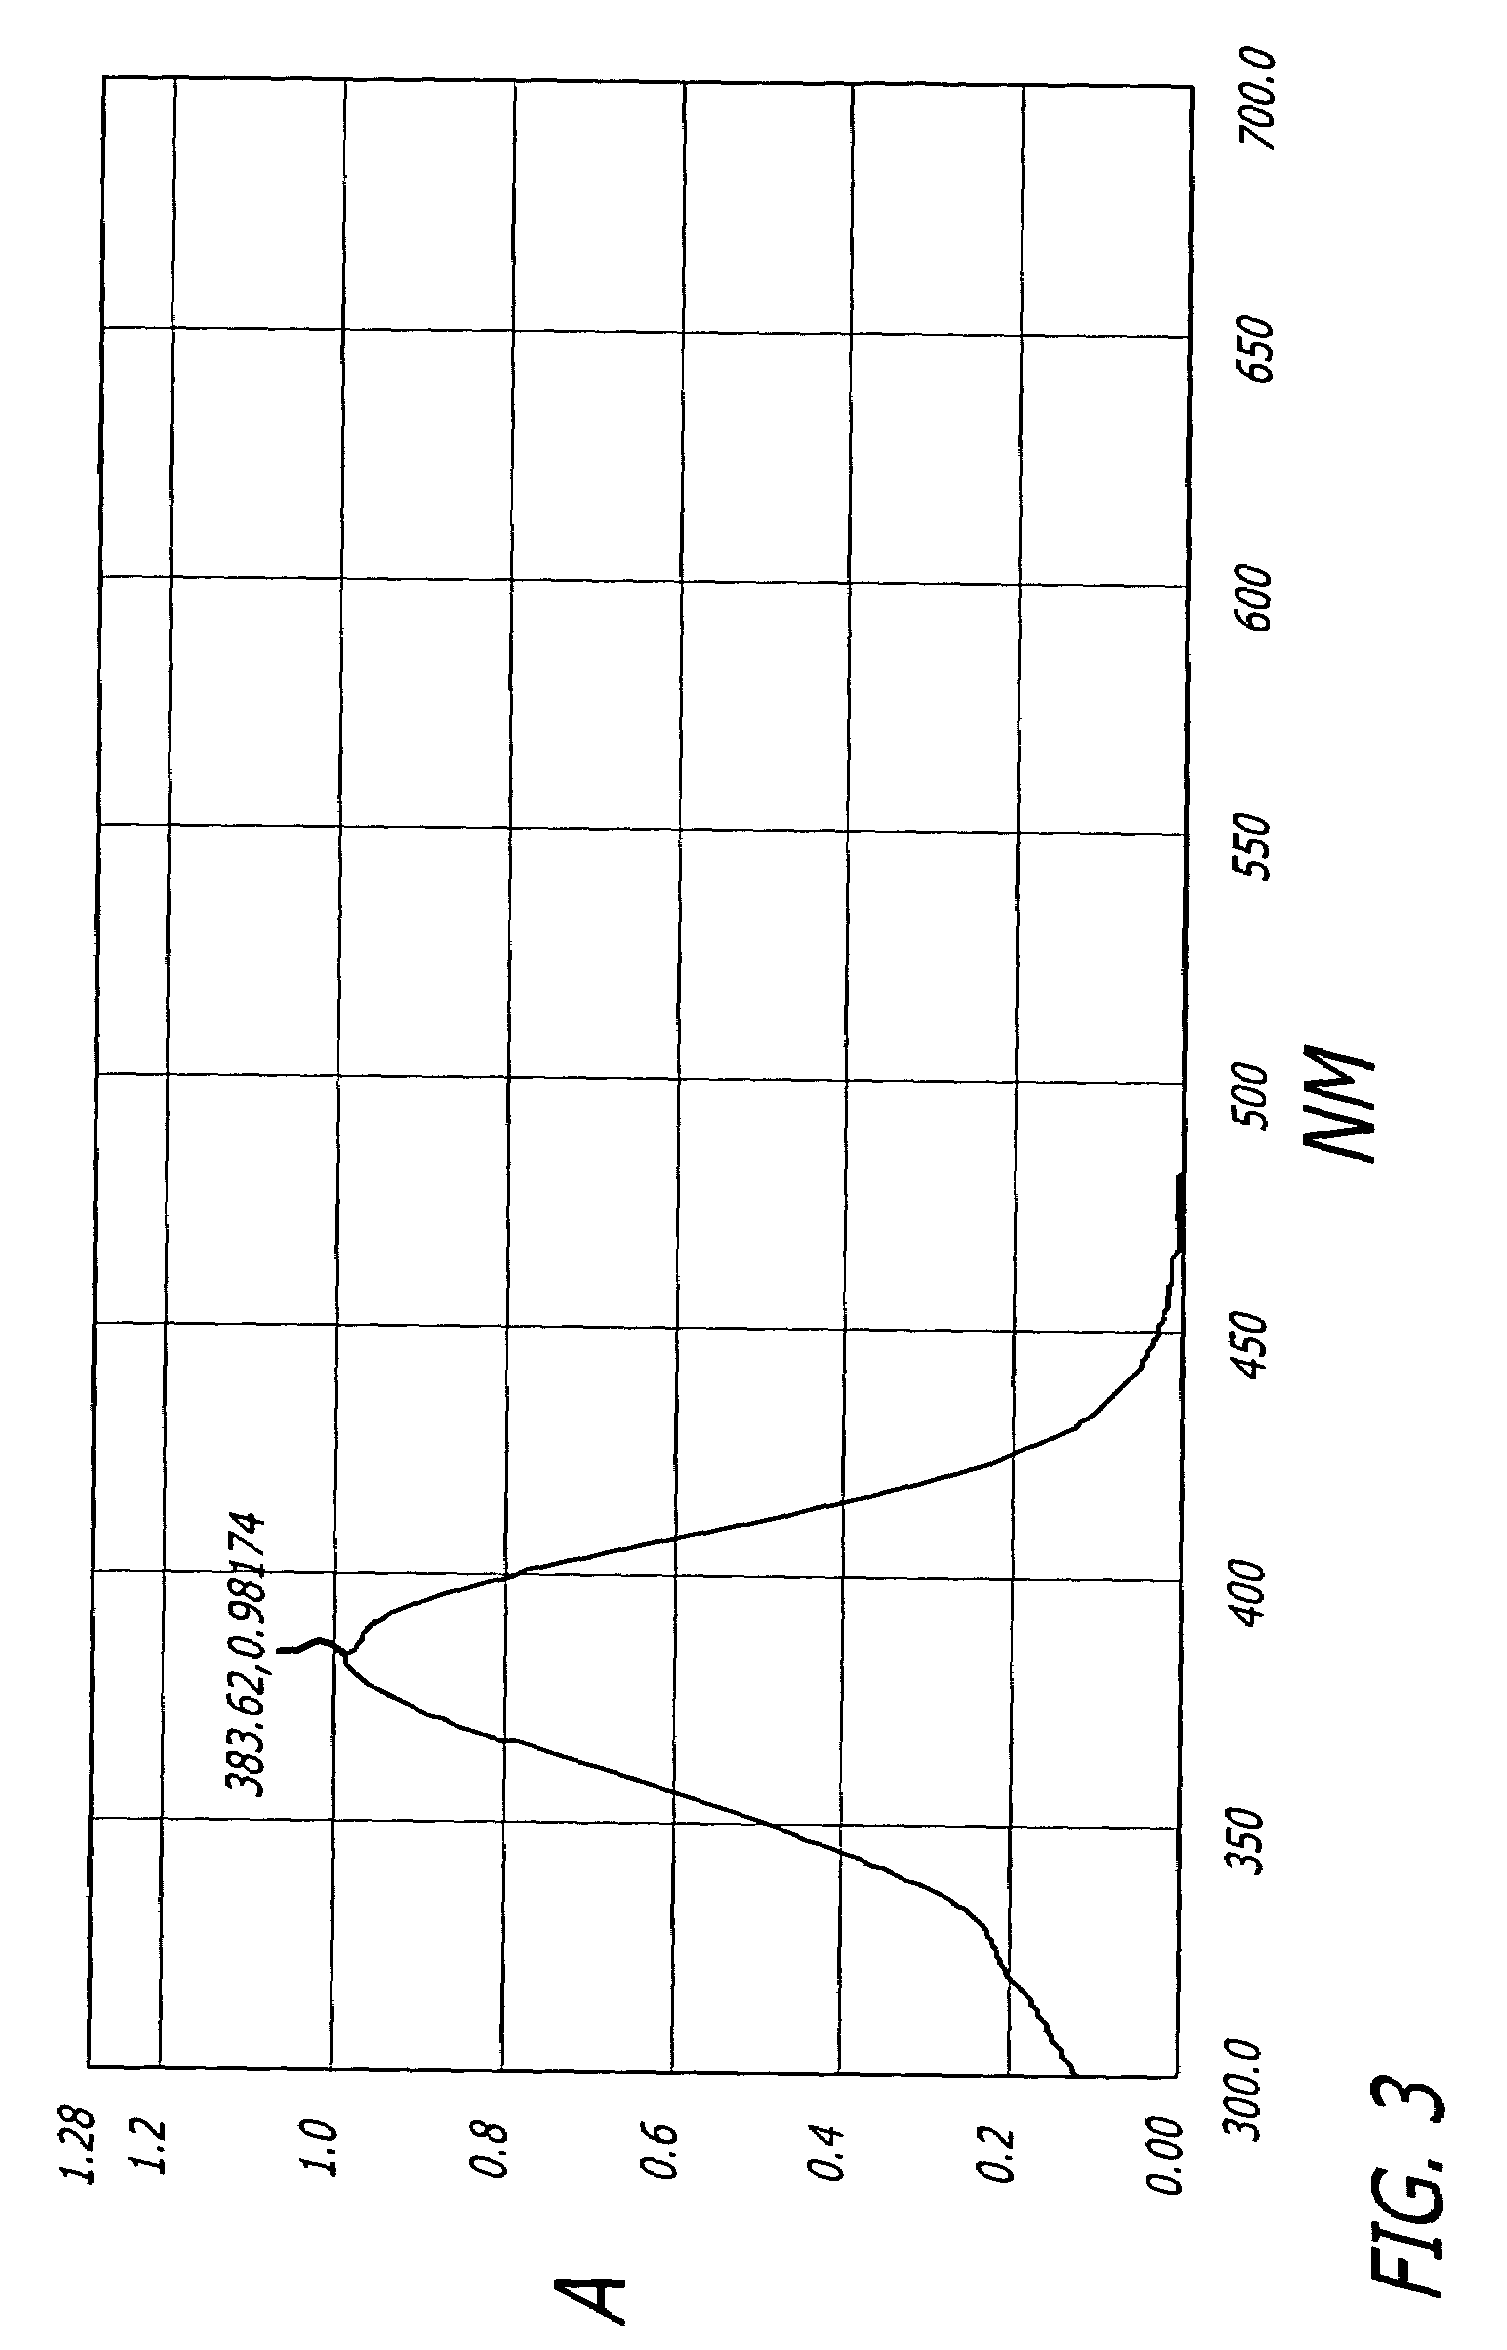 Ophthalmic devices having a highly selective violet light transmissive filter and related methods